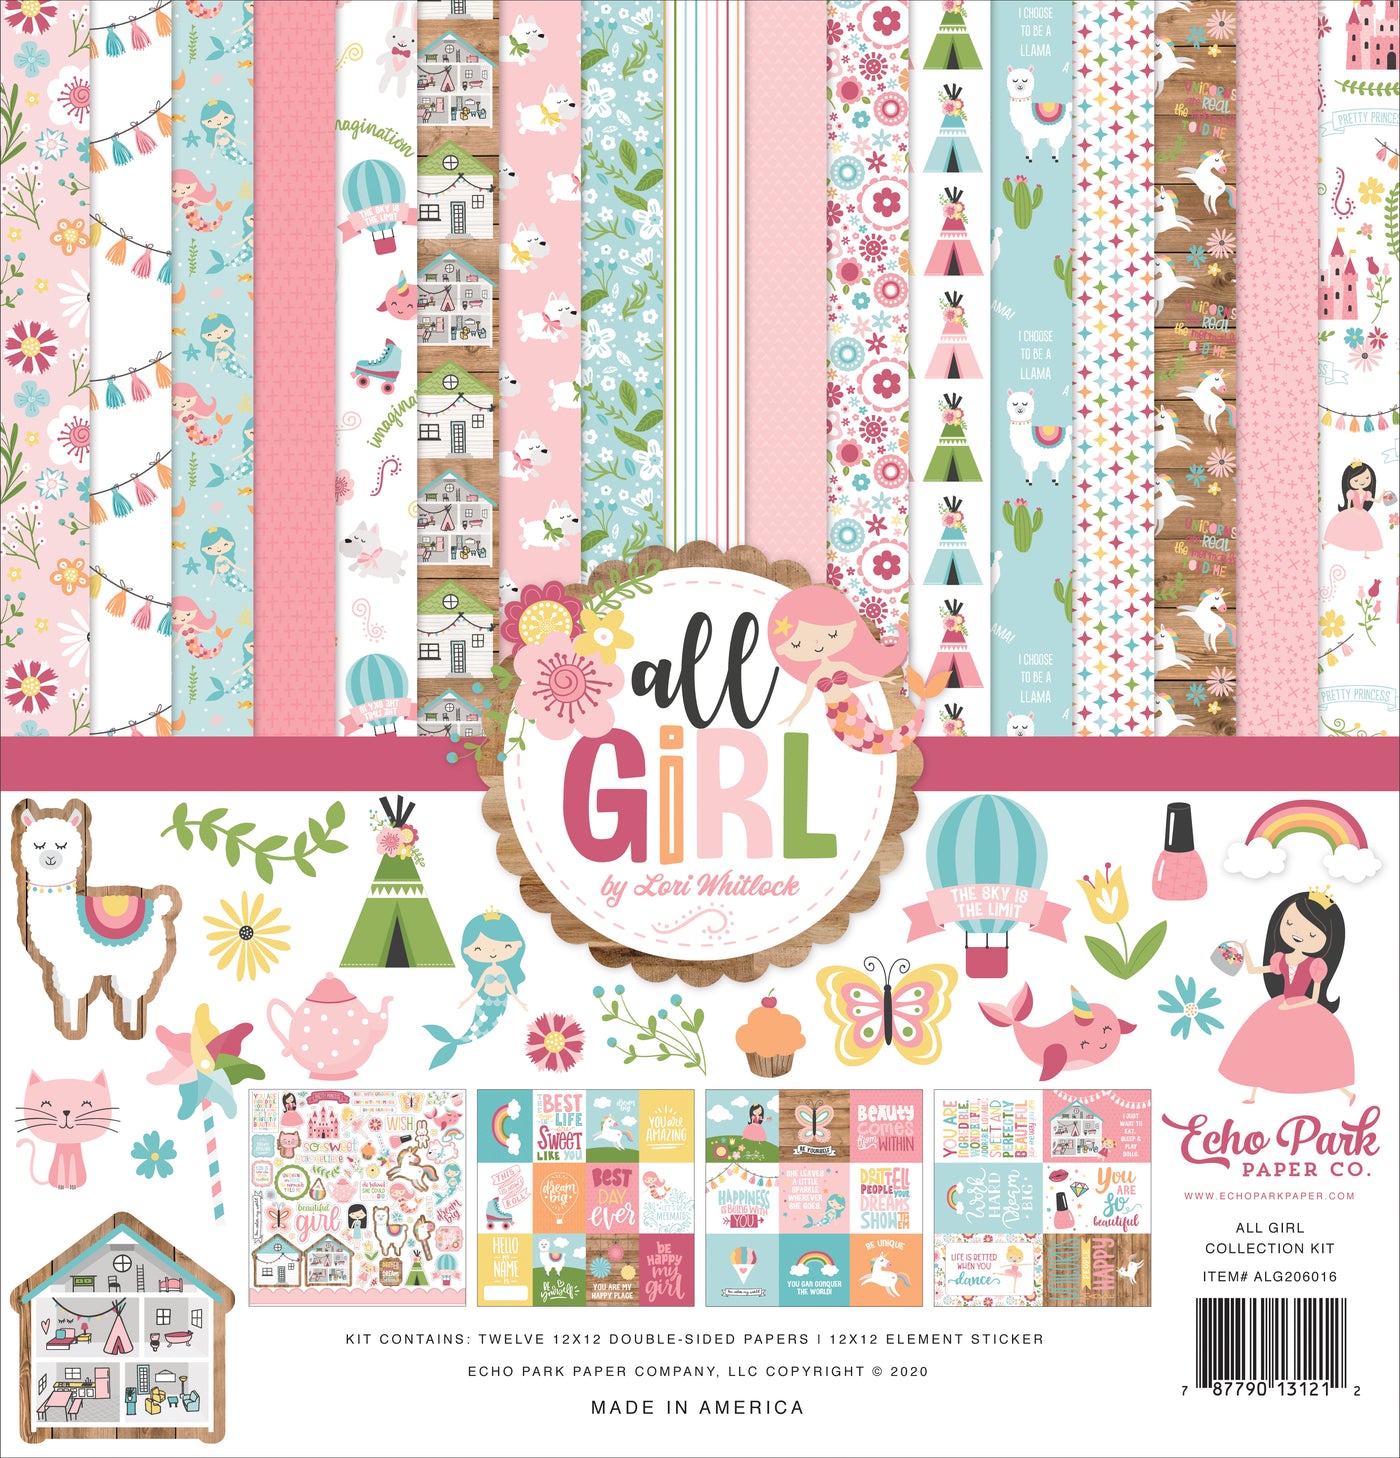 Twelve 12x12 double-sided designer sheets with creative patterns featuring florals, butterflies, storks, and all the love for a little girl. Archival quality and acid-free.